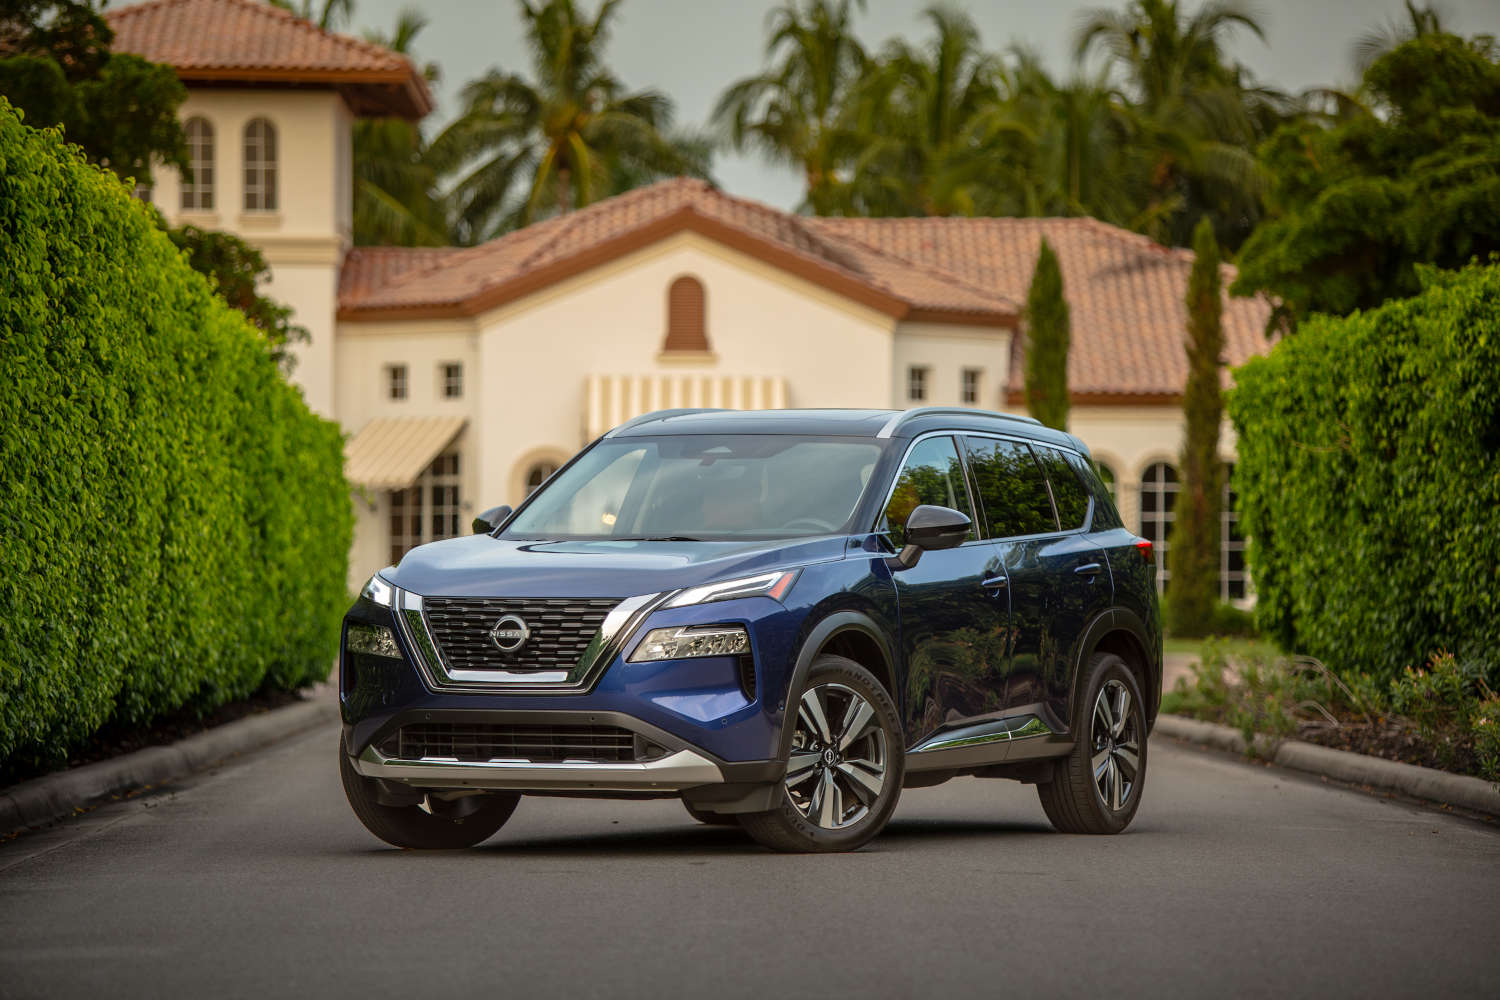 The 2023 Nissan Rogue price is justifiable